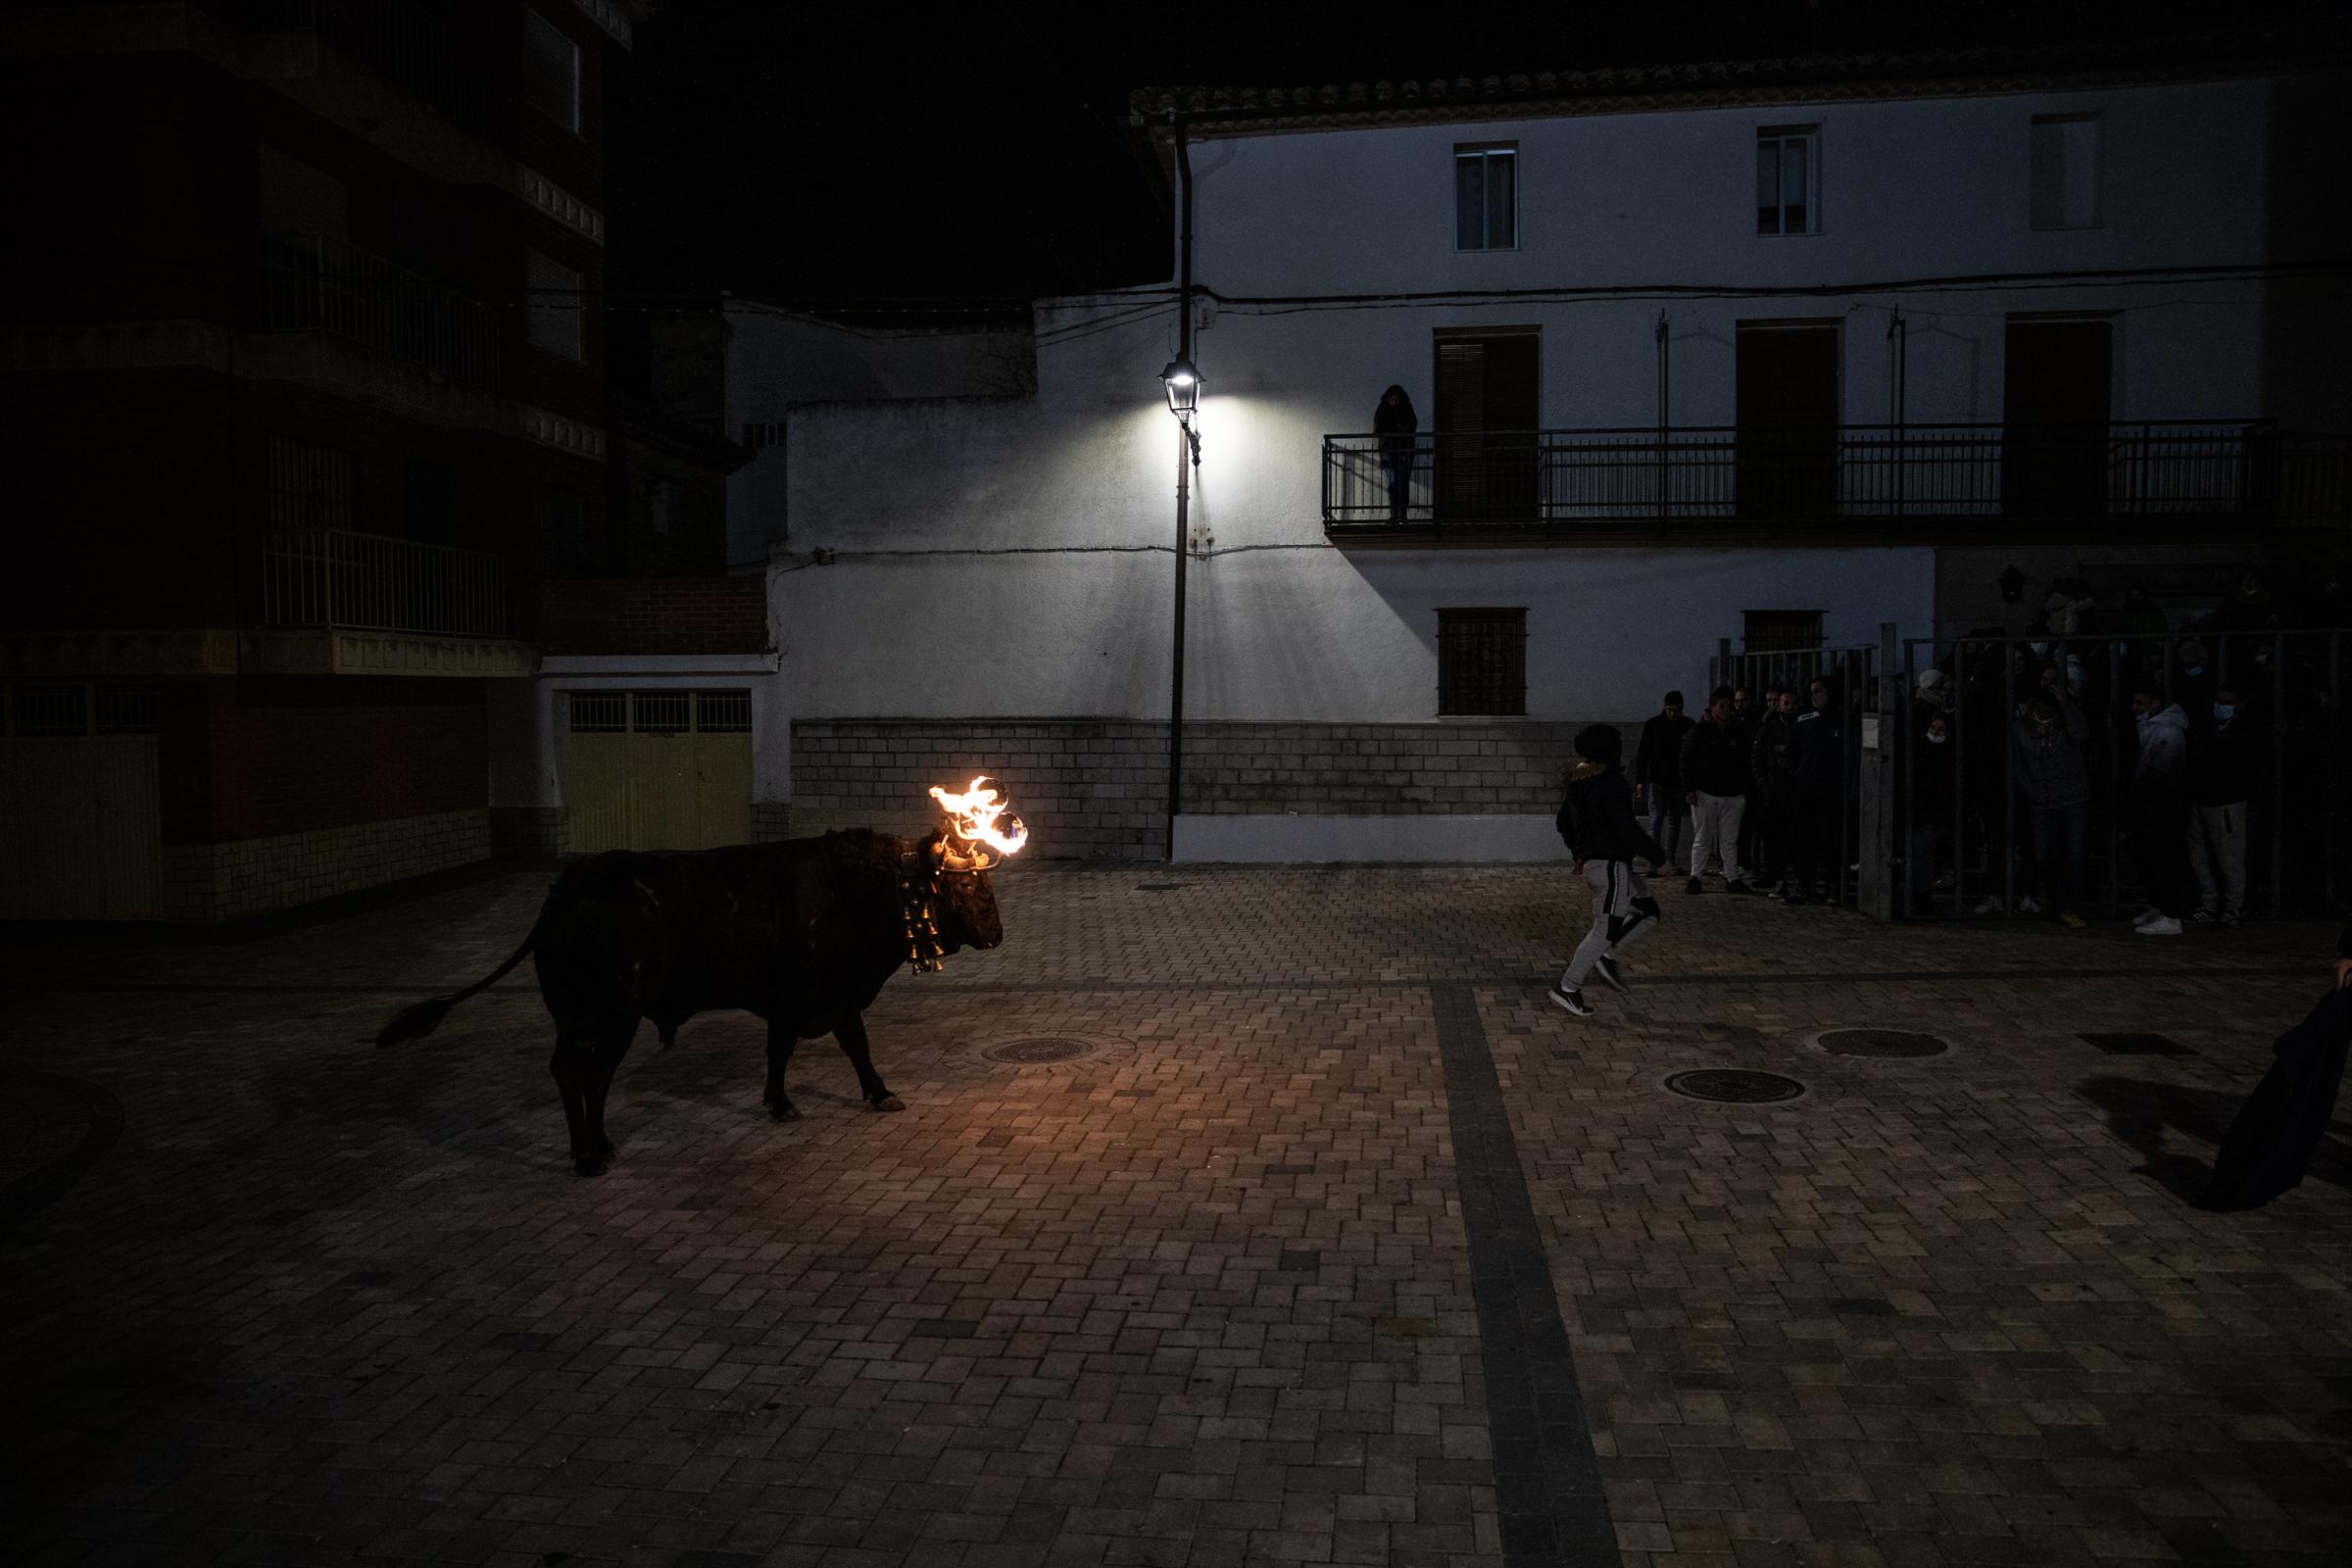 Spain's Dwindling Bullfighting Traditions - VALENCIA, SPAIN - DECEMBER 04: Young people have fun with...